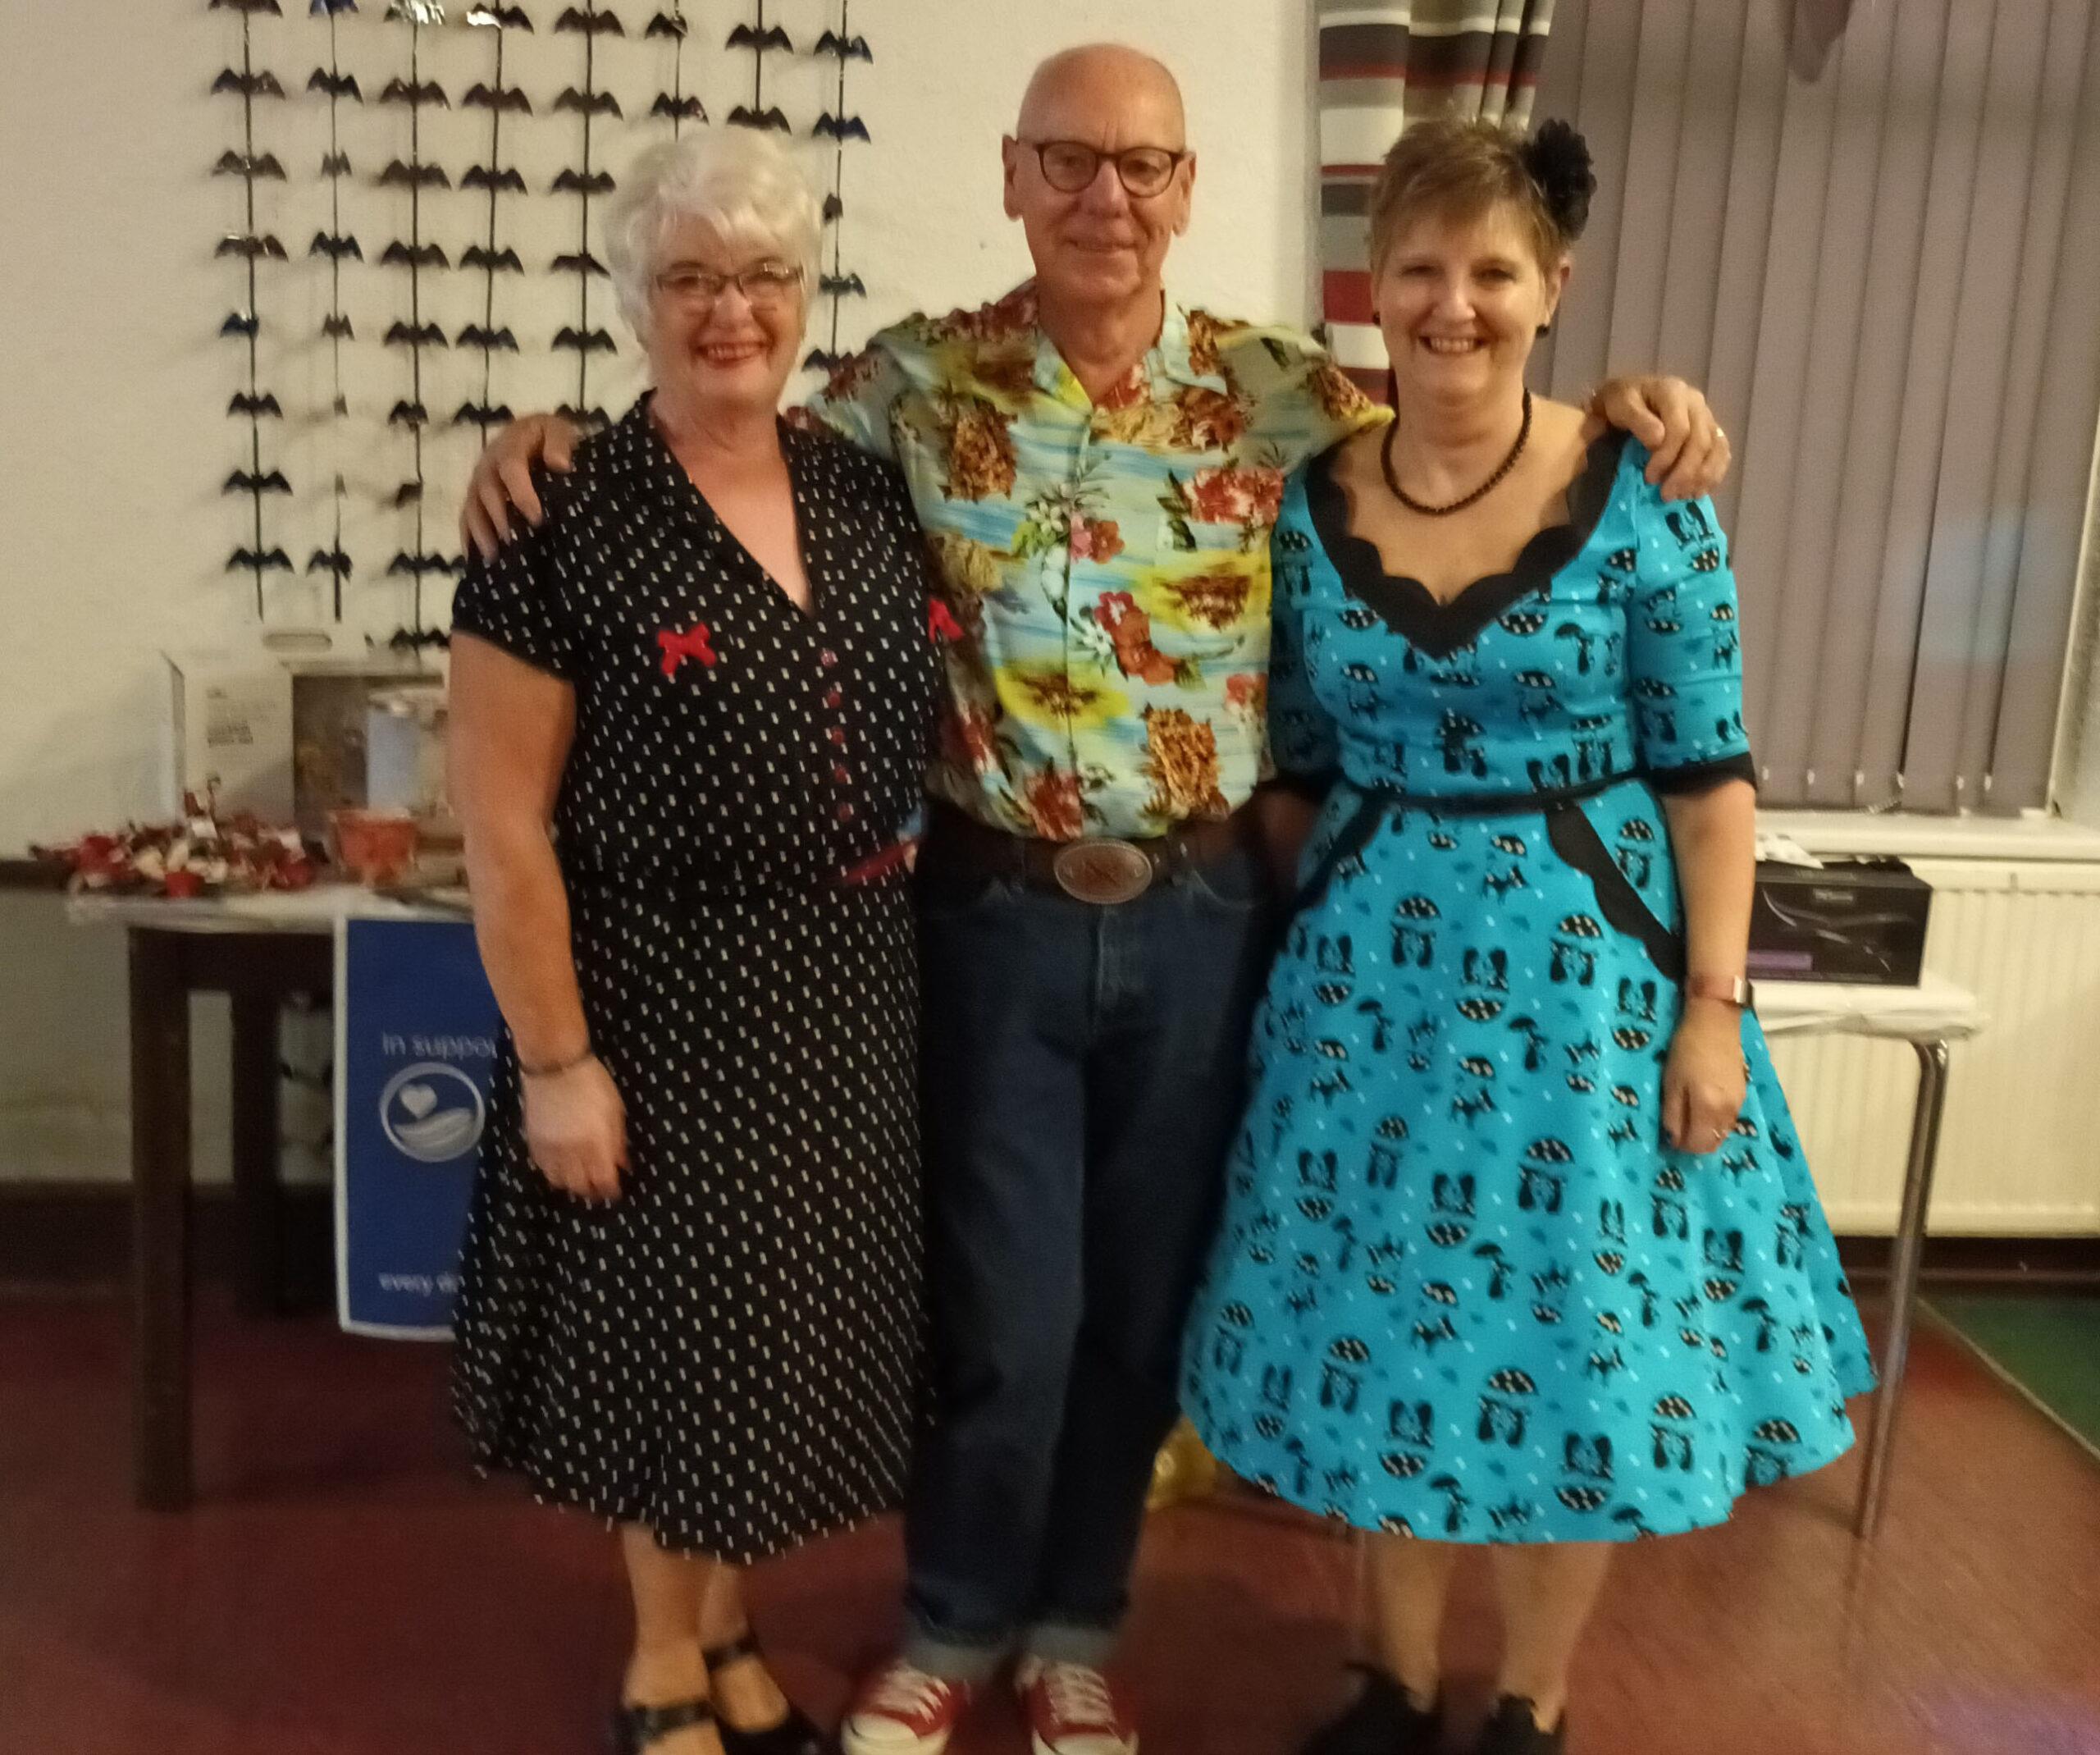 Two women in 1950s style dresses with man wearing bright shirt in the middle